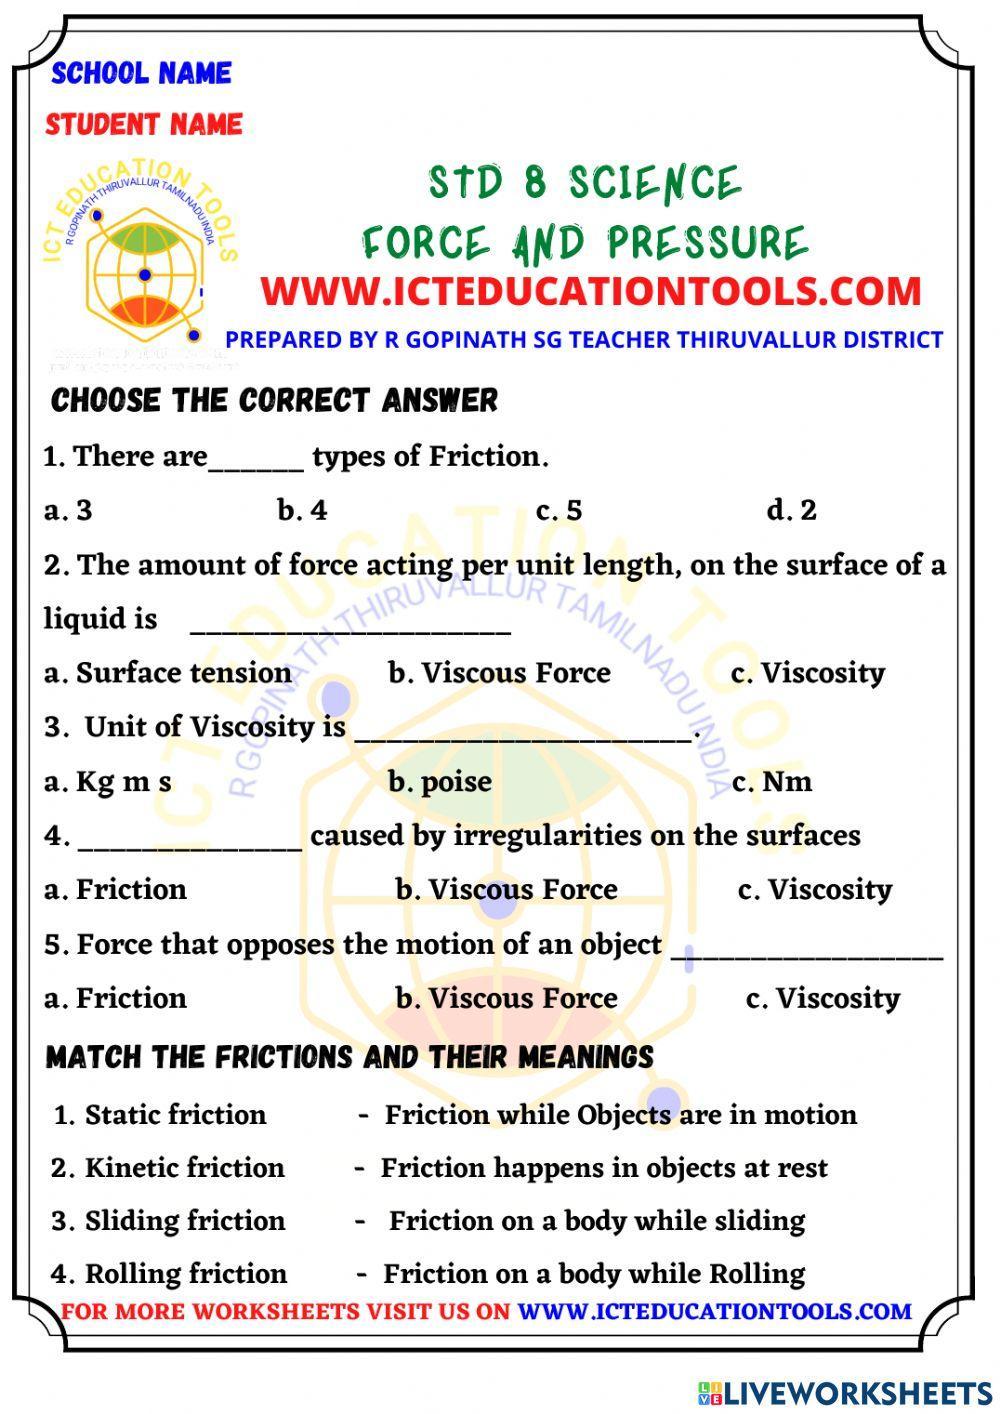 Std 8 science force and presure - friction